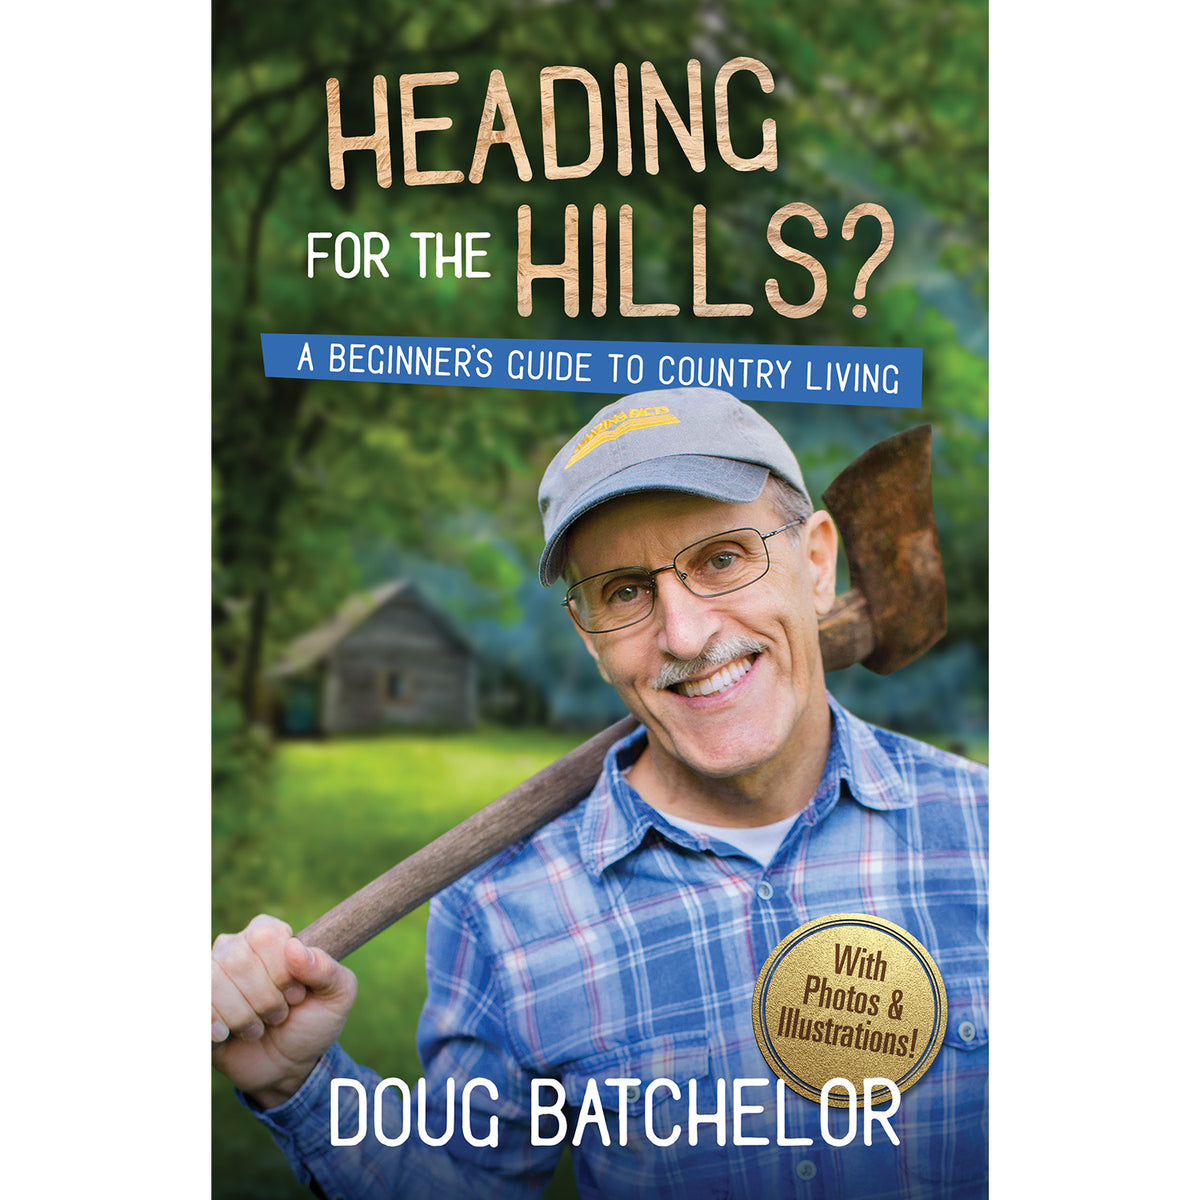 Heading for the Hills: A Beginner's Guide to Country Living by Doug Batchelor